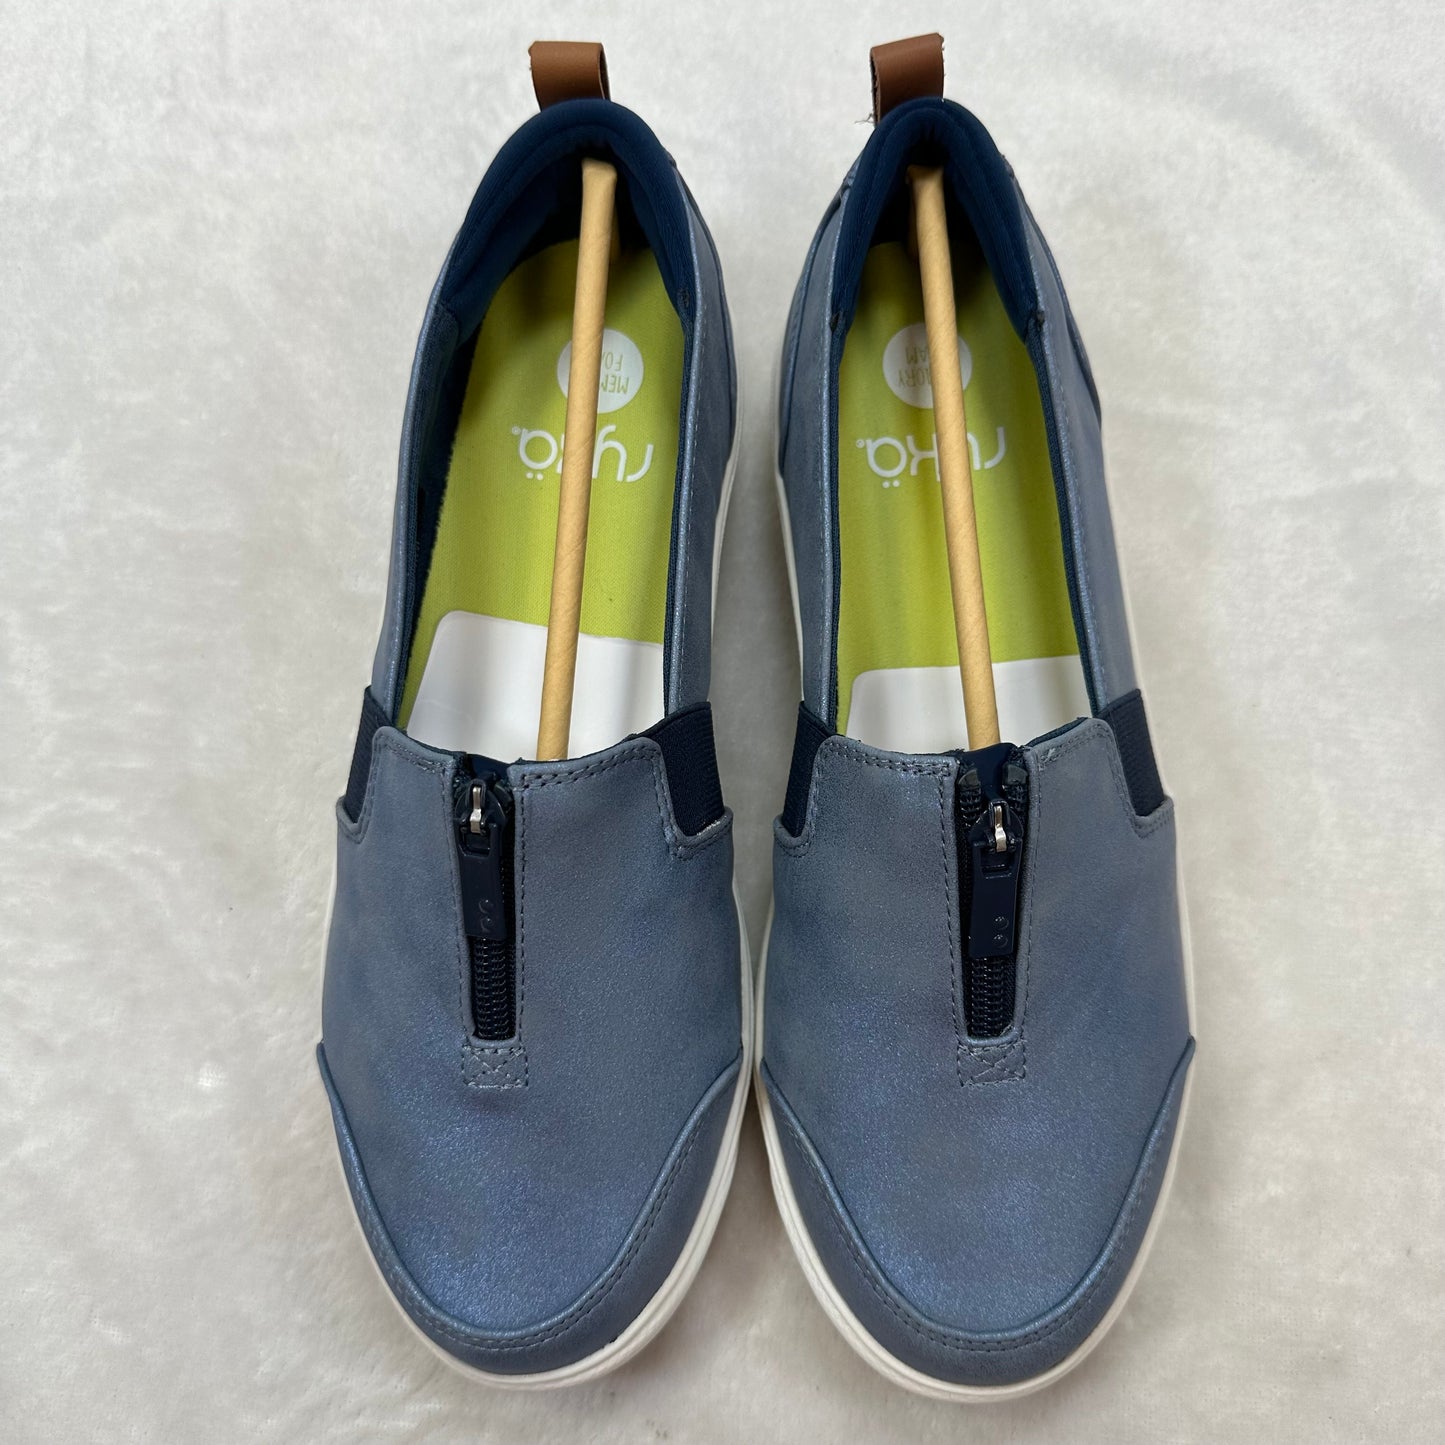 Shoes Flats Other By Ryka  Size: 8.5